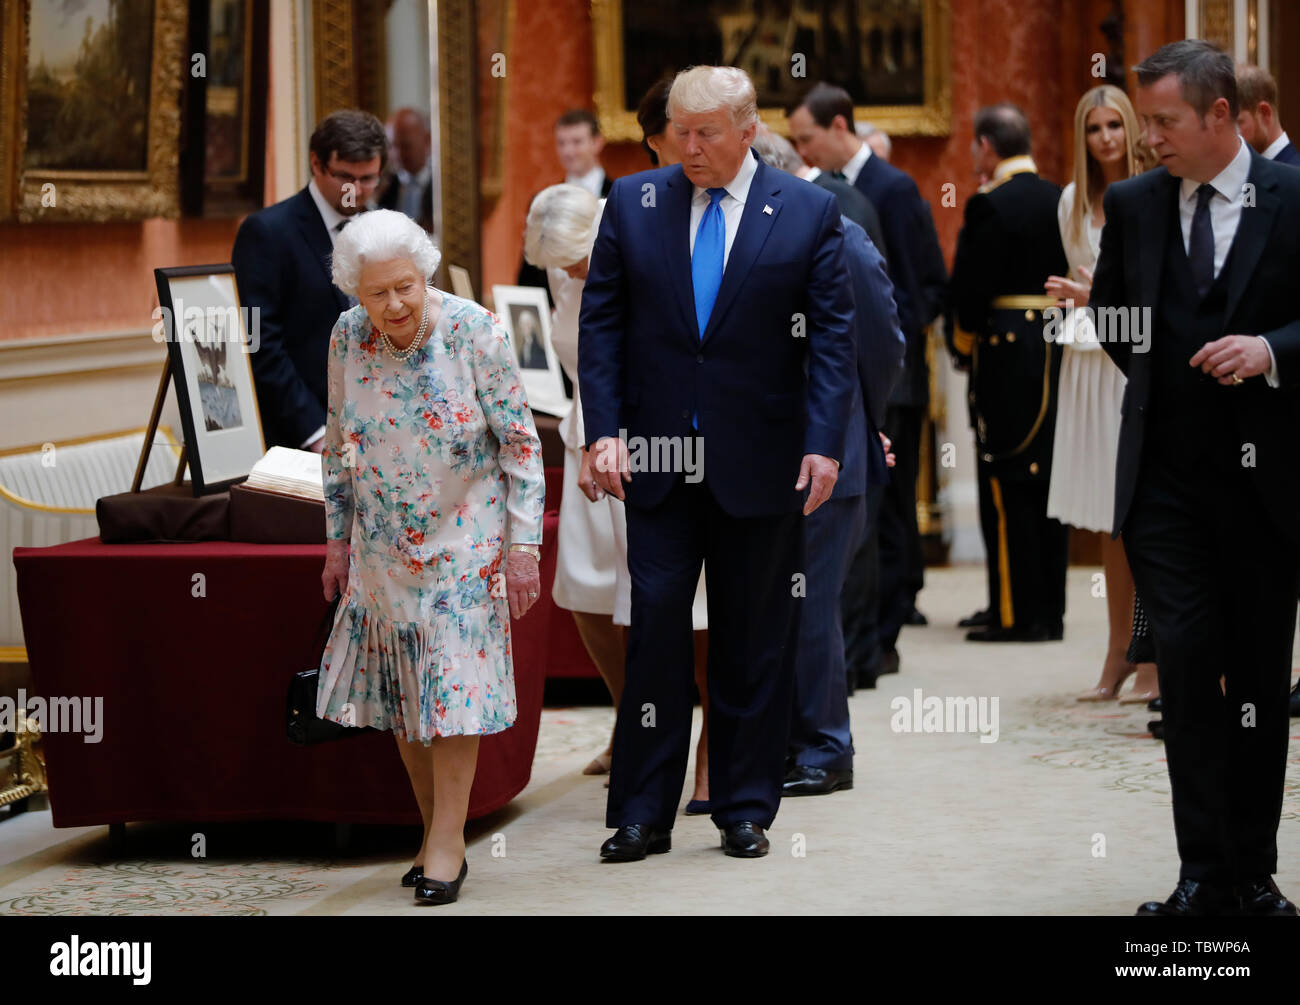 Queen Elizabeth II with US President Donald Trump view a special exhibition in the Picture Gallery of items from the Royal Collection of historical significance to the US, following a private lunch at Buckingham Palace in London, on day one of his three day state visit to the UK. Stock Photo